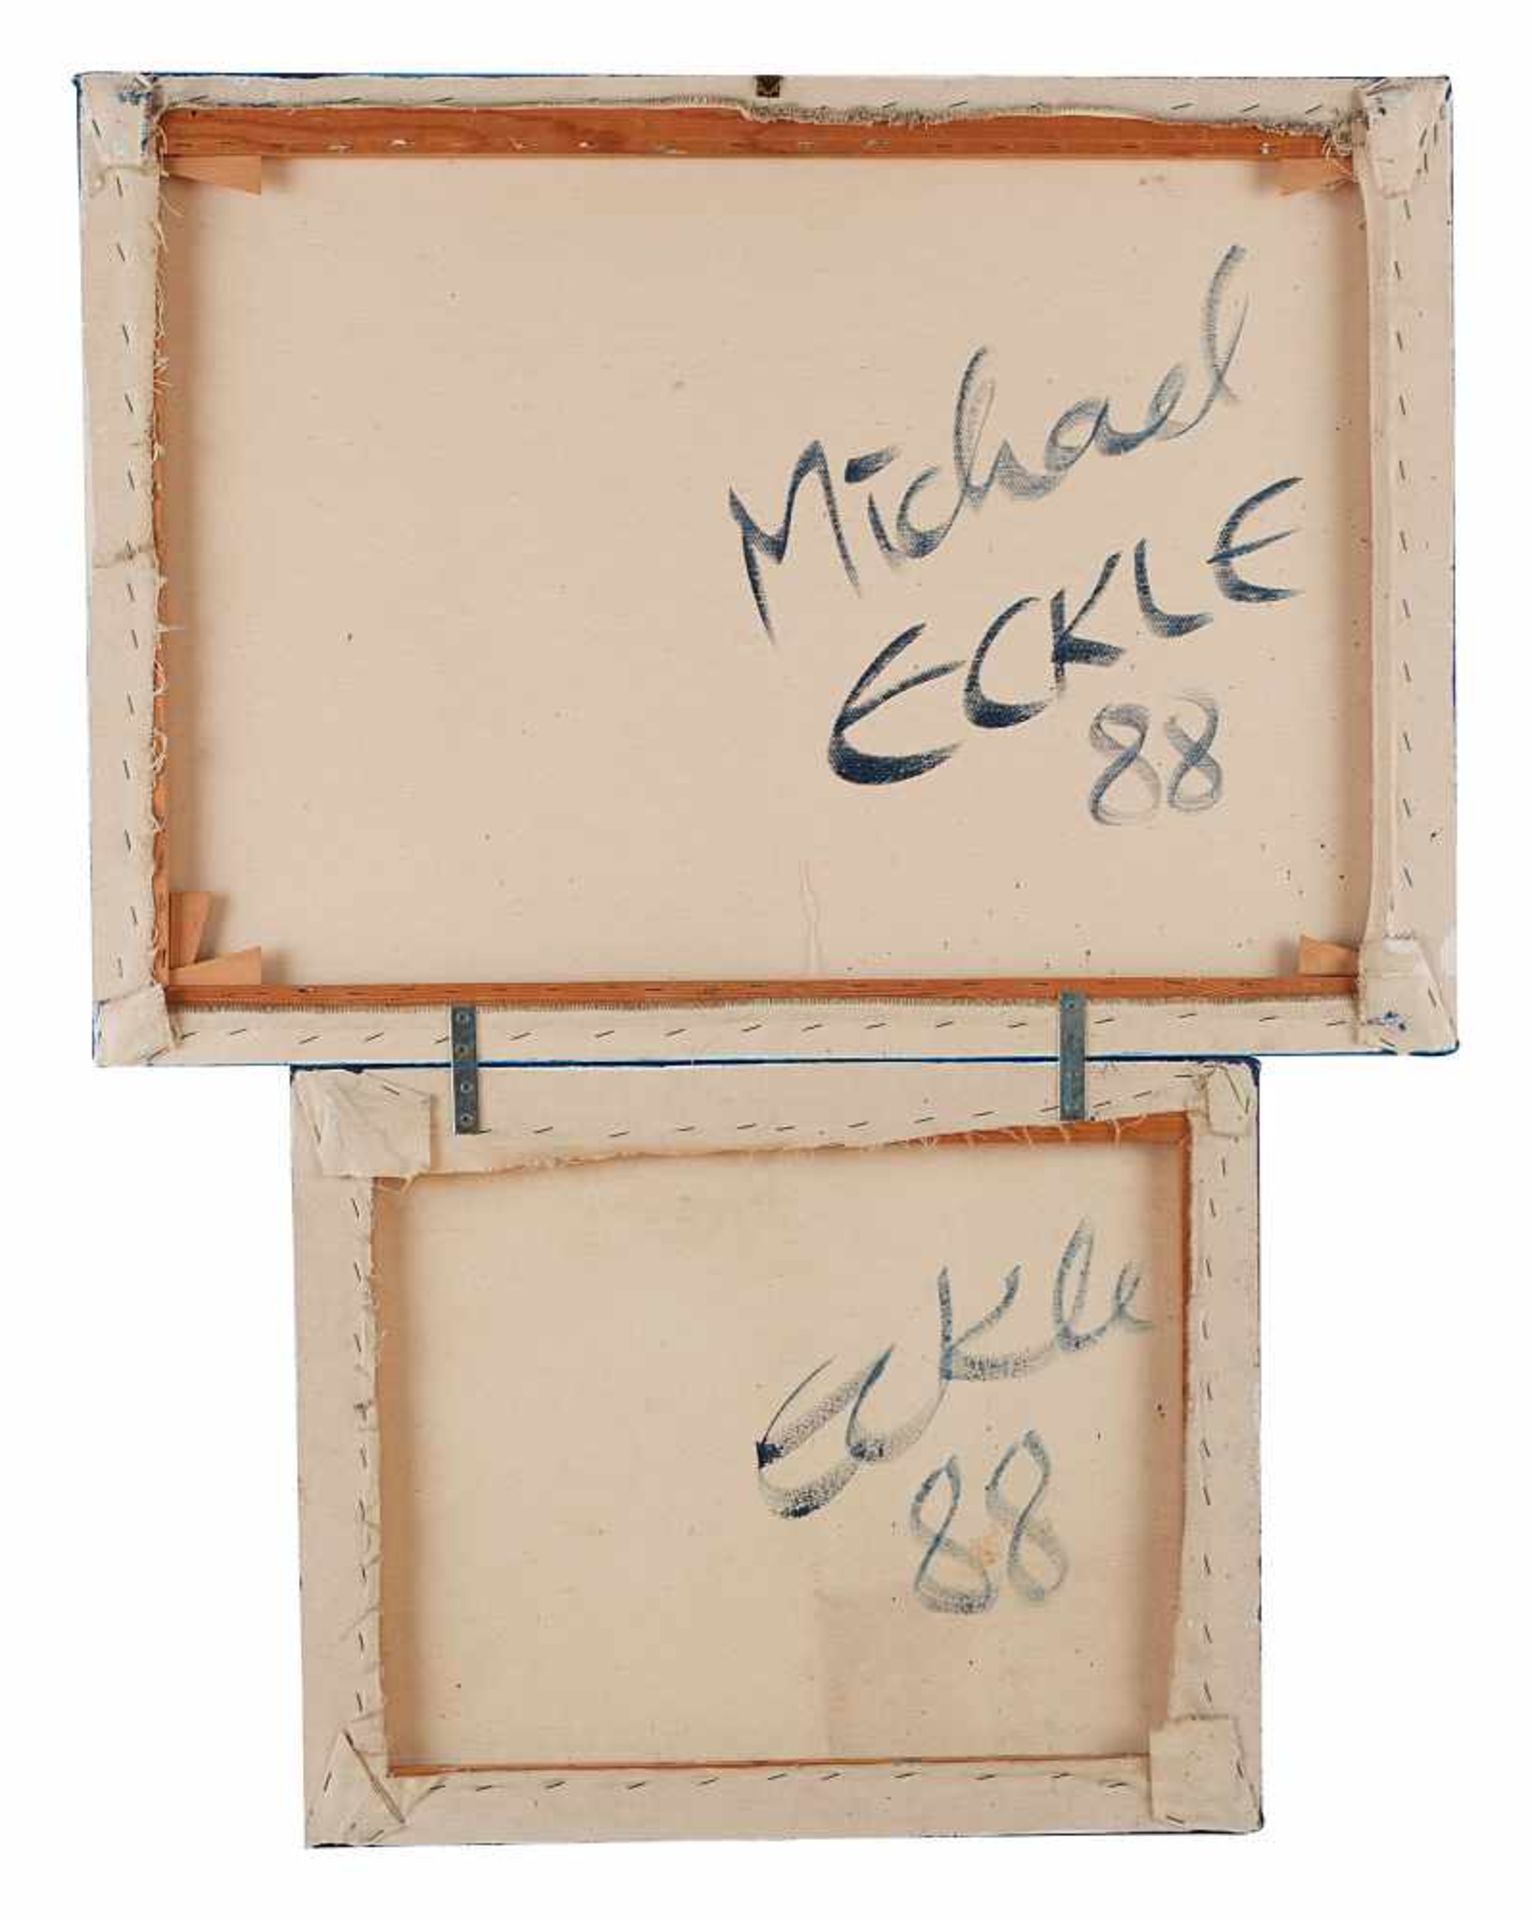 Eckle, Michael - Image 2 of 2